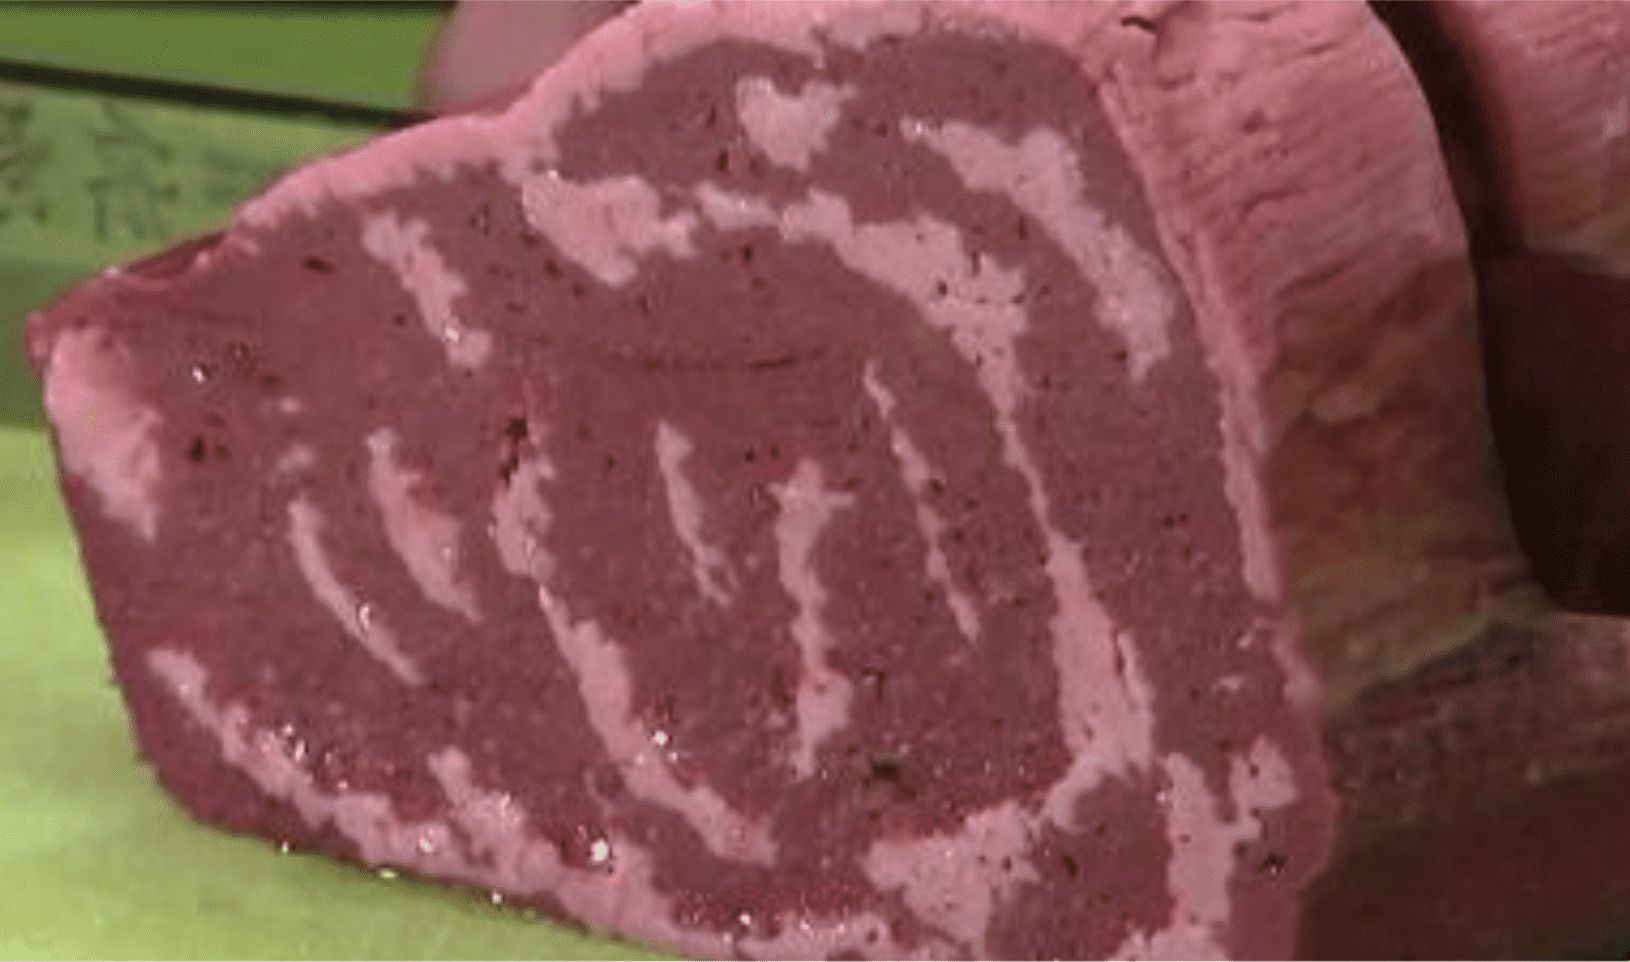 Think Lab Grown Meat Is Bad? Check Out "3D Printed" Steaks! | WLT Report